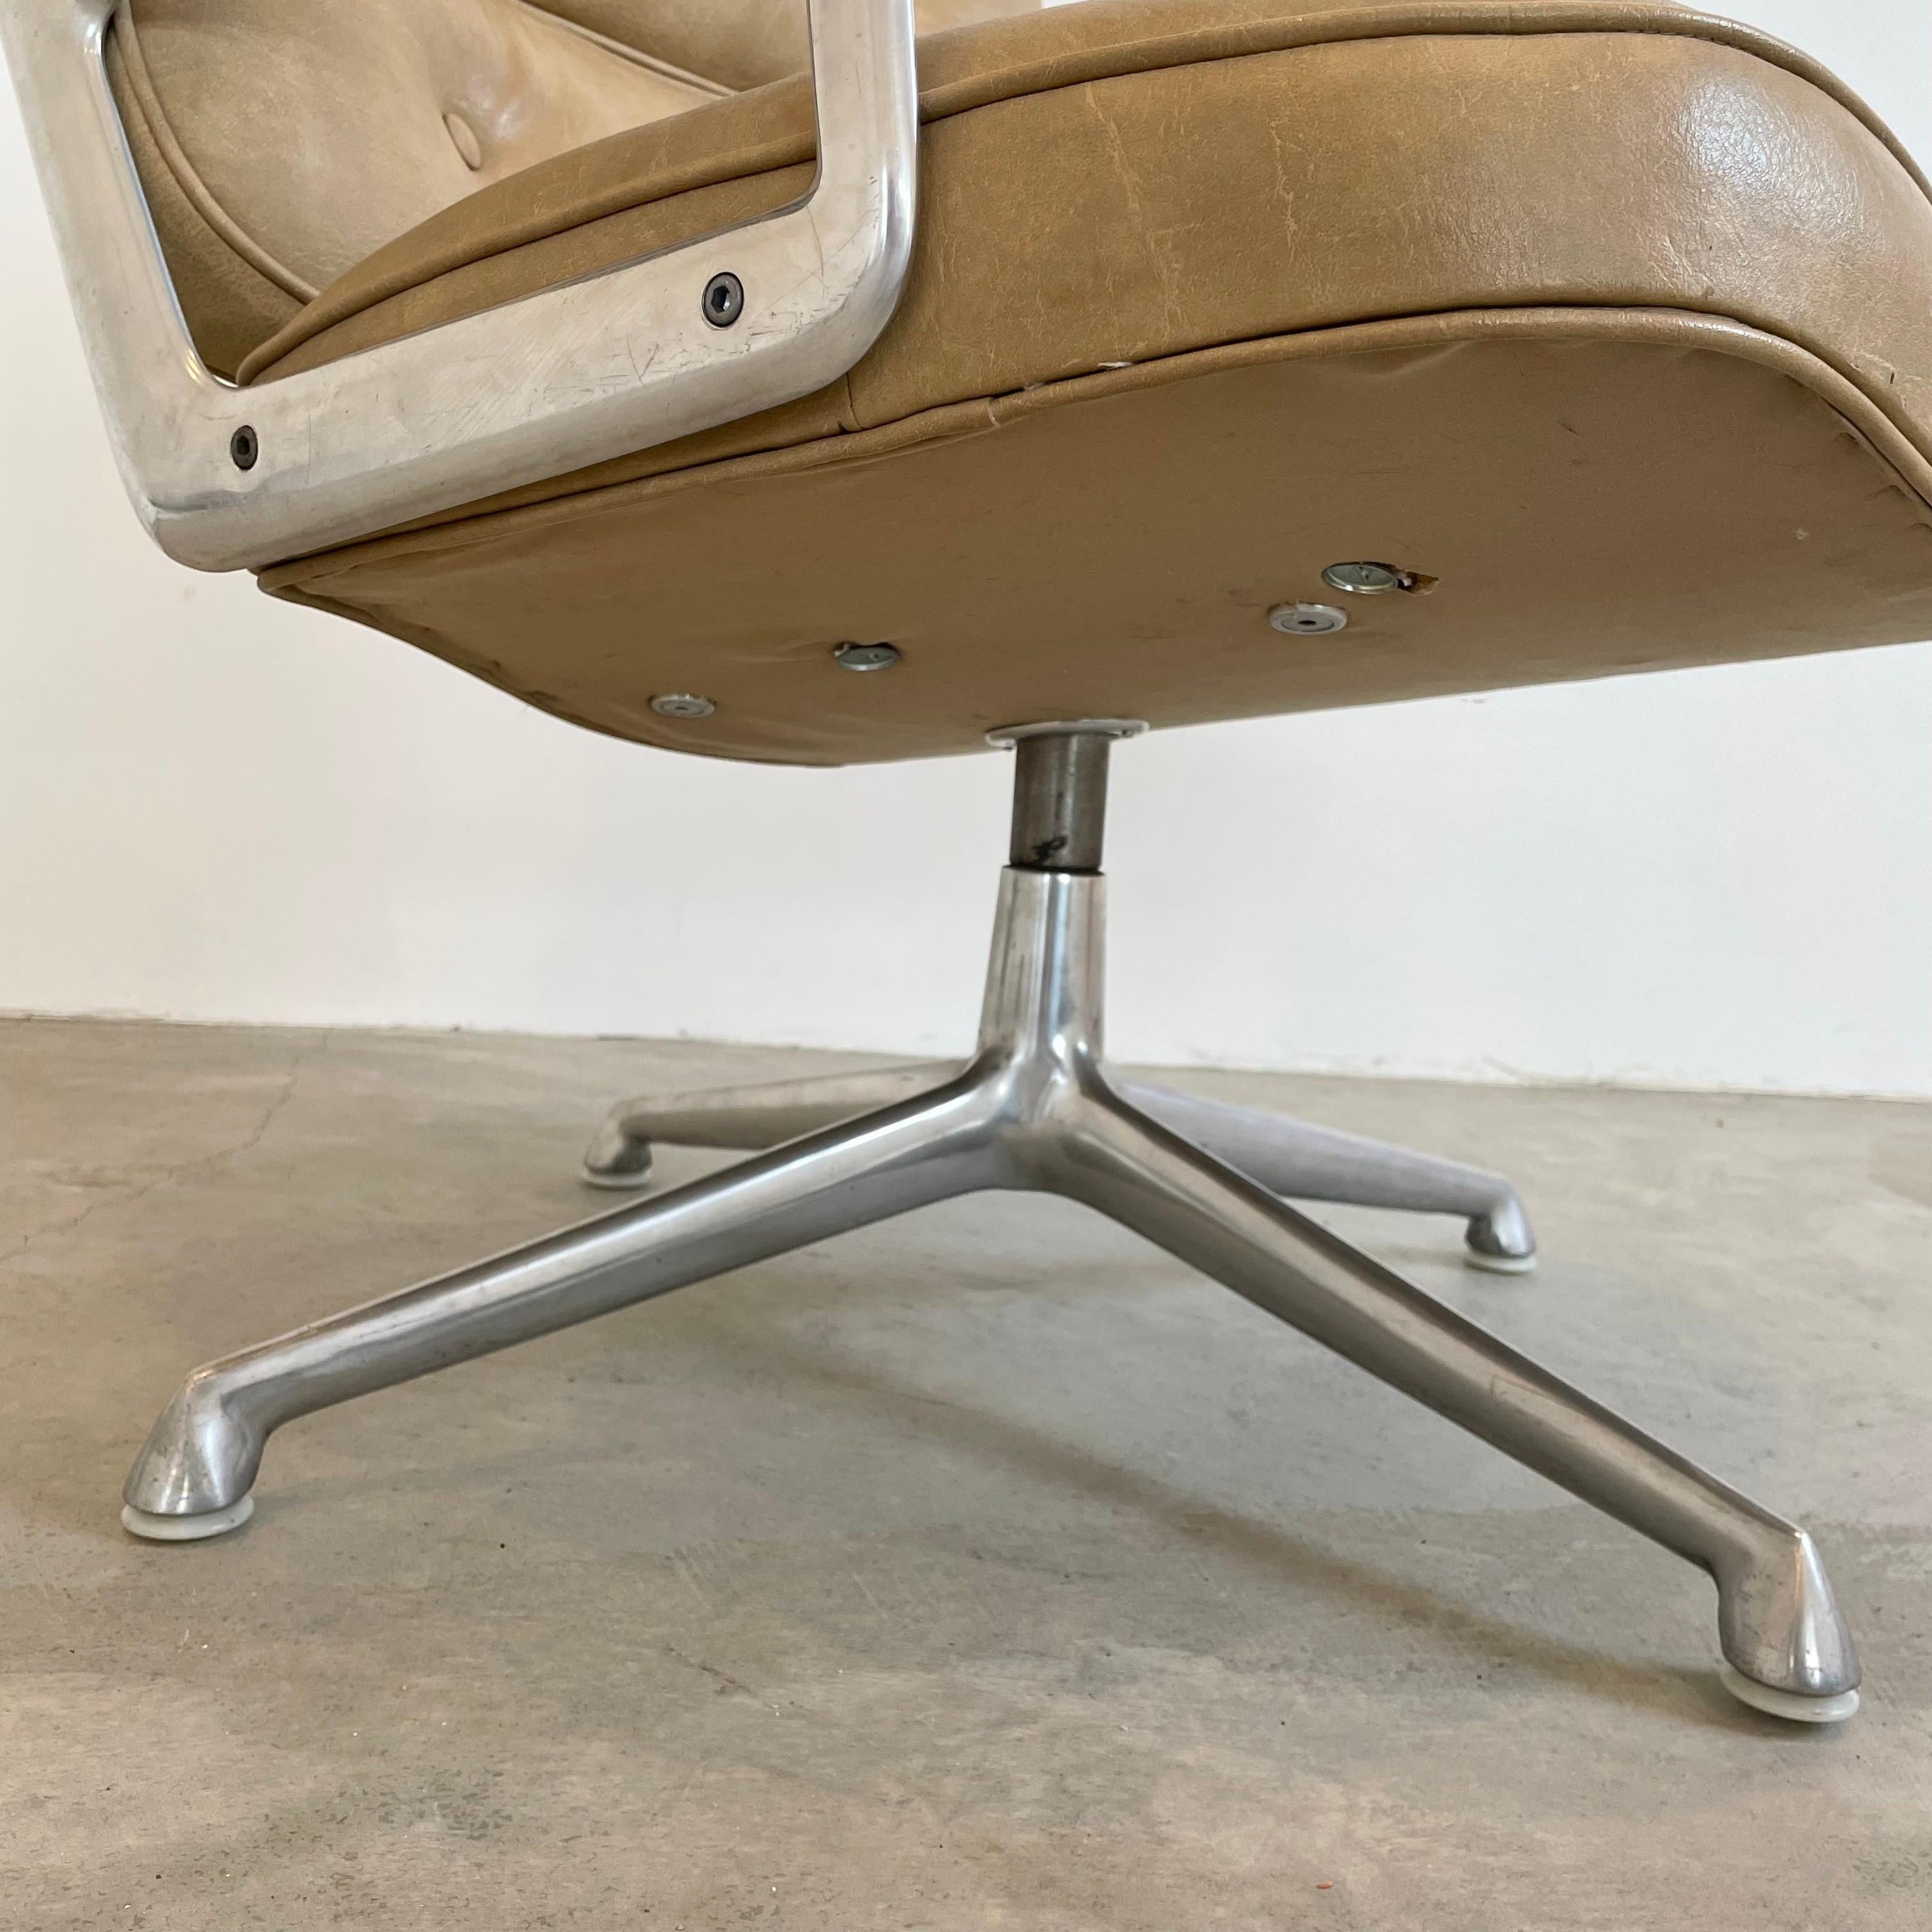 Vintage Eames Time Life Lobby Chair in Camel 6